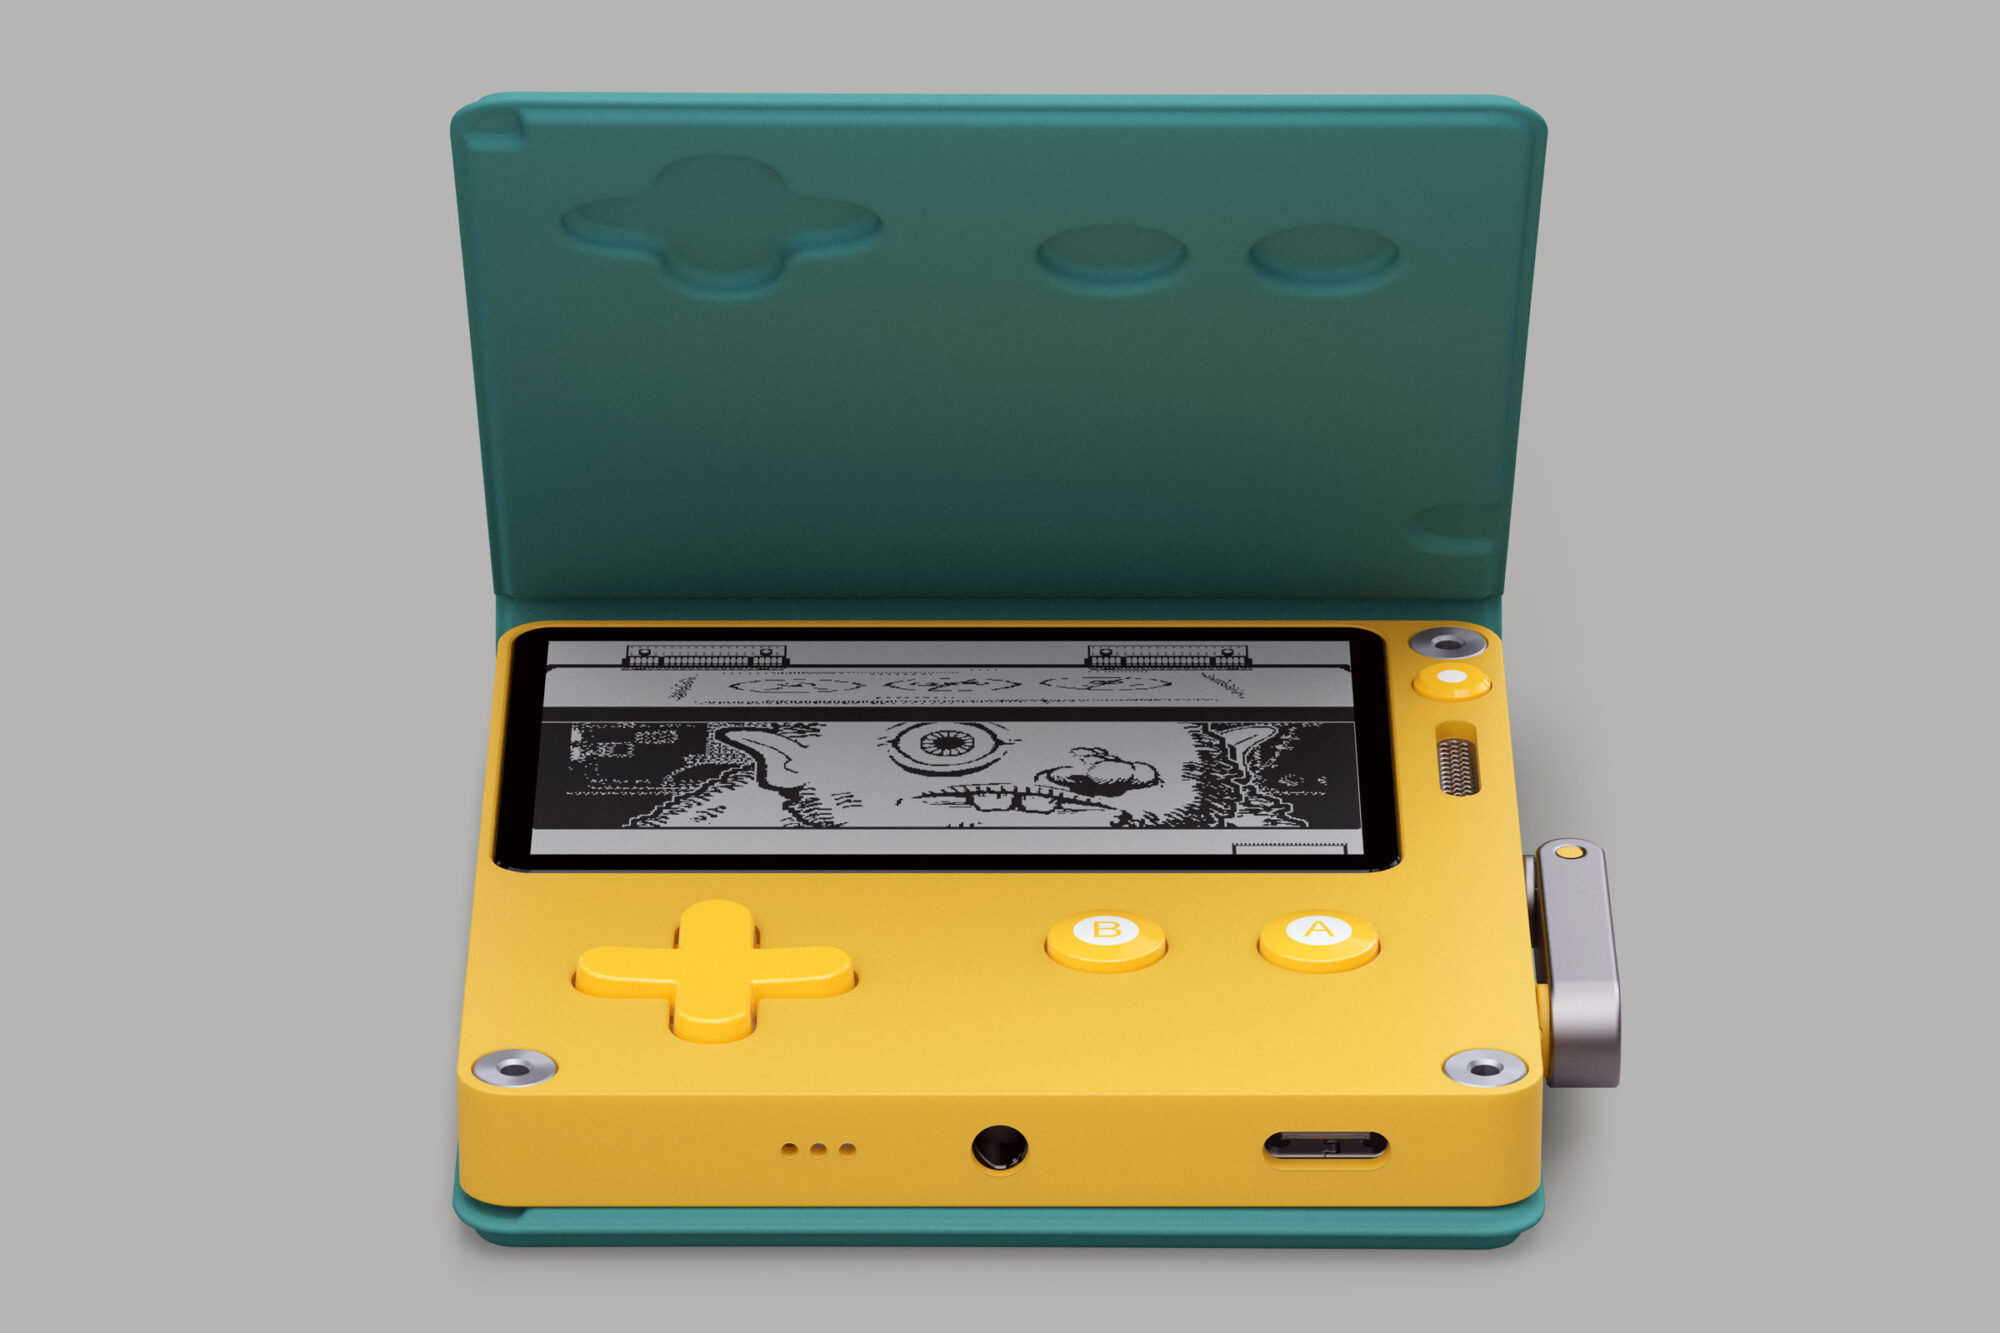 An image swiped from the media kit of the Playdate. It shows a Playdate console lay flat on a surface yet housed in a green cover that magnetically attaches to the back of the small yellow console, and folds over the top, clasping down at the front.